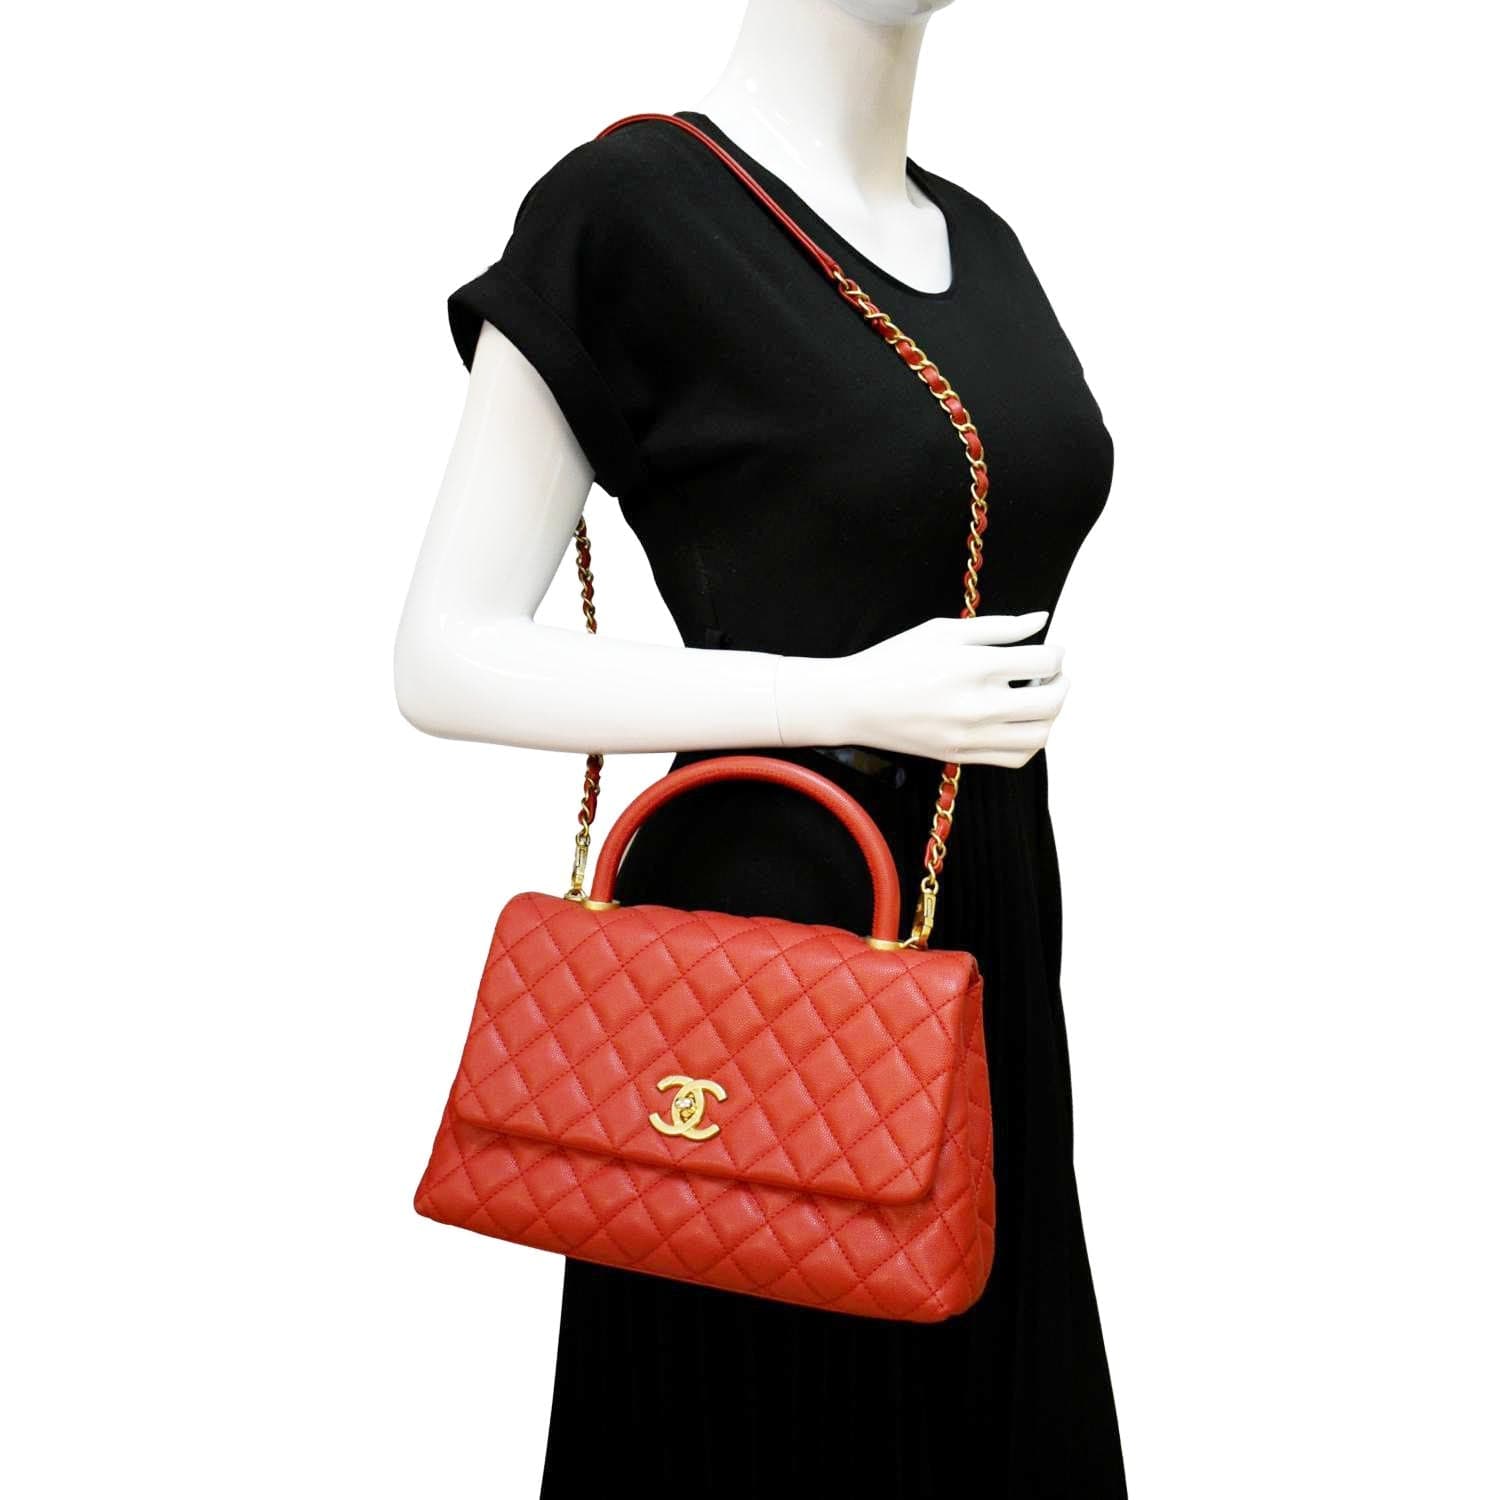 Chanel Medium Coco Quilted Caviar Leather Top Handle Shoulder Bag Red